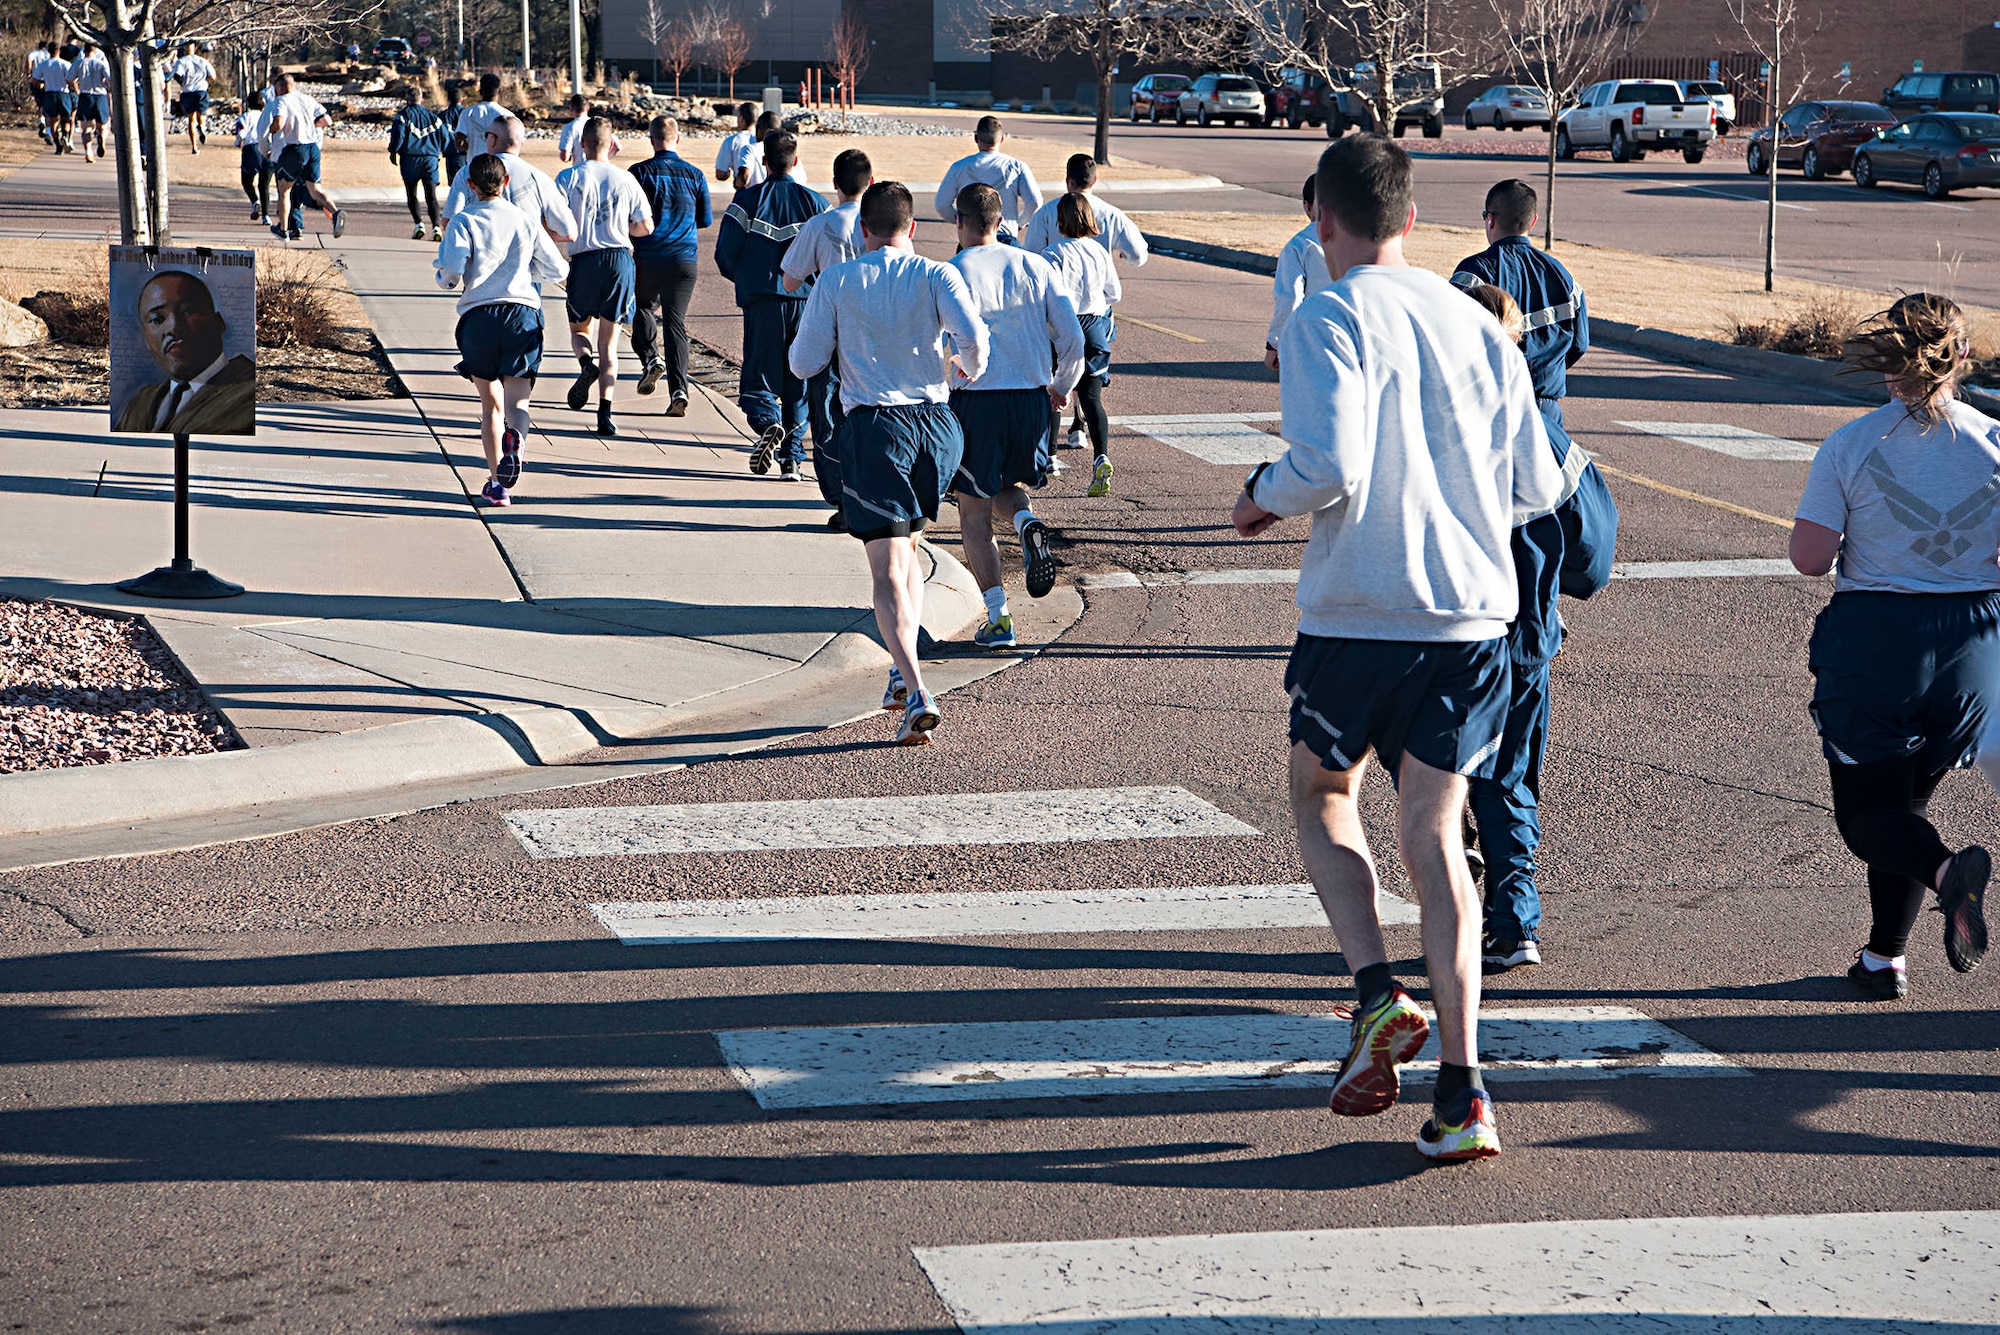 PETERSON AIR FORCE BASE, Colo. – Members of the 21st Space Wing participate in a special Wing Warfit run dedicated to the memory of Dr. Martin Luther King Jr. on Peterson Air Force Base, Colo., Jan. 17, 2017. Wing Warfit is a monthly run conducted to raise morale and build esprit de corps in the wing. (U.S. Air Force photo by Steve Kotecki)